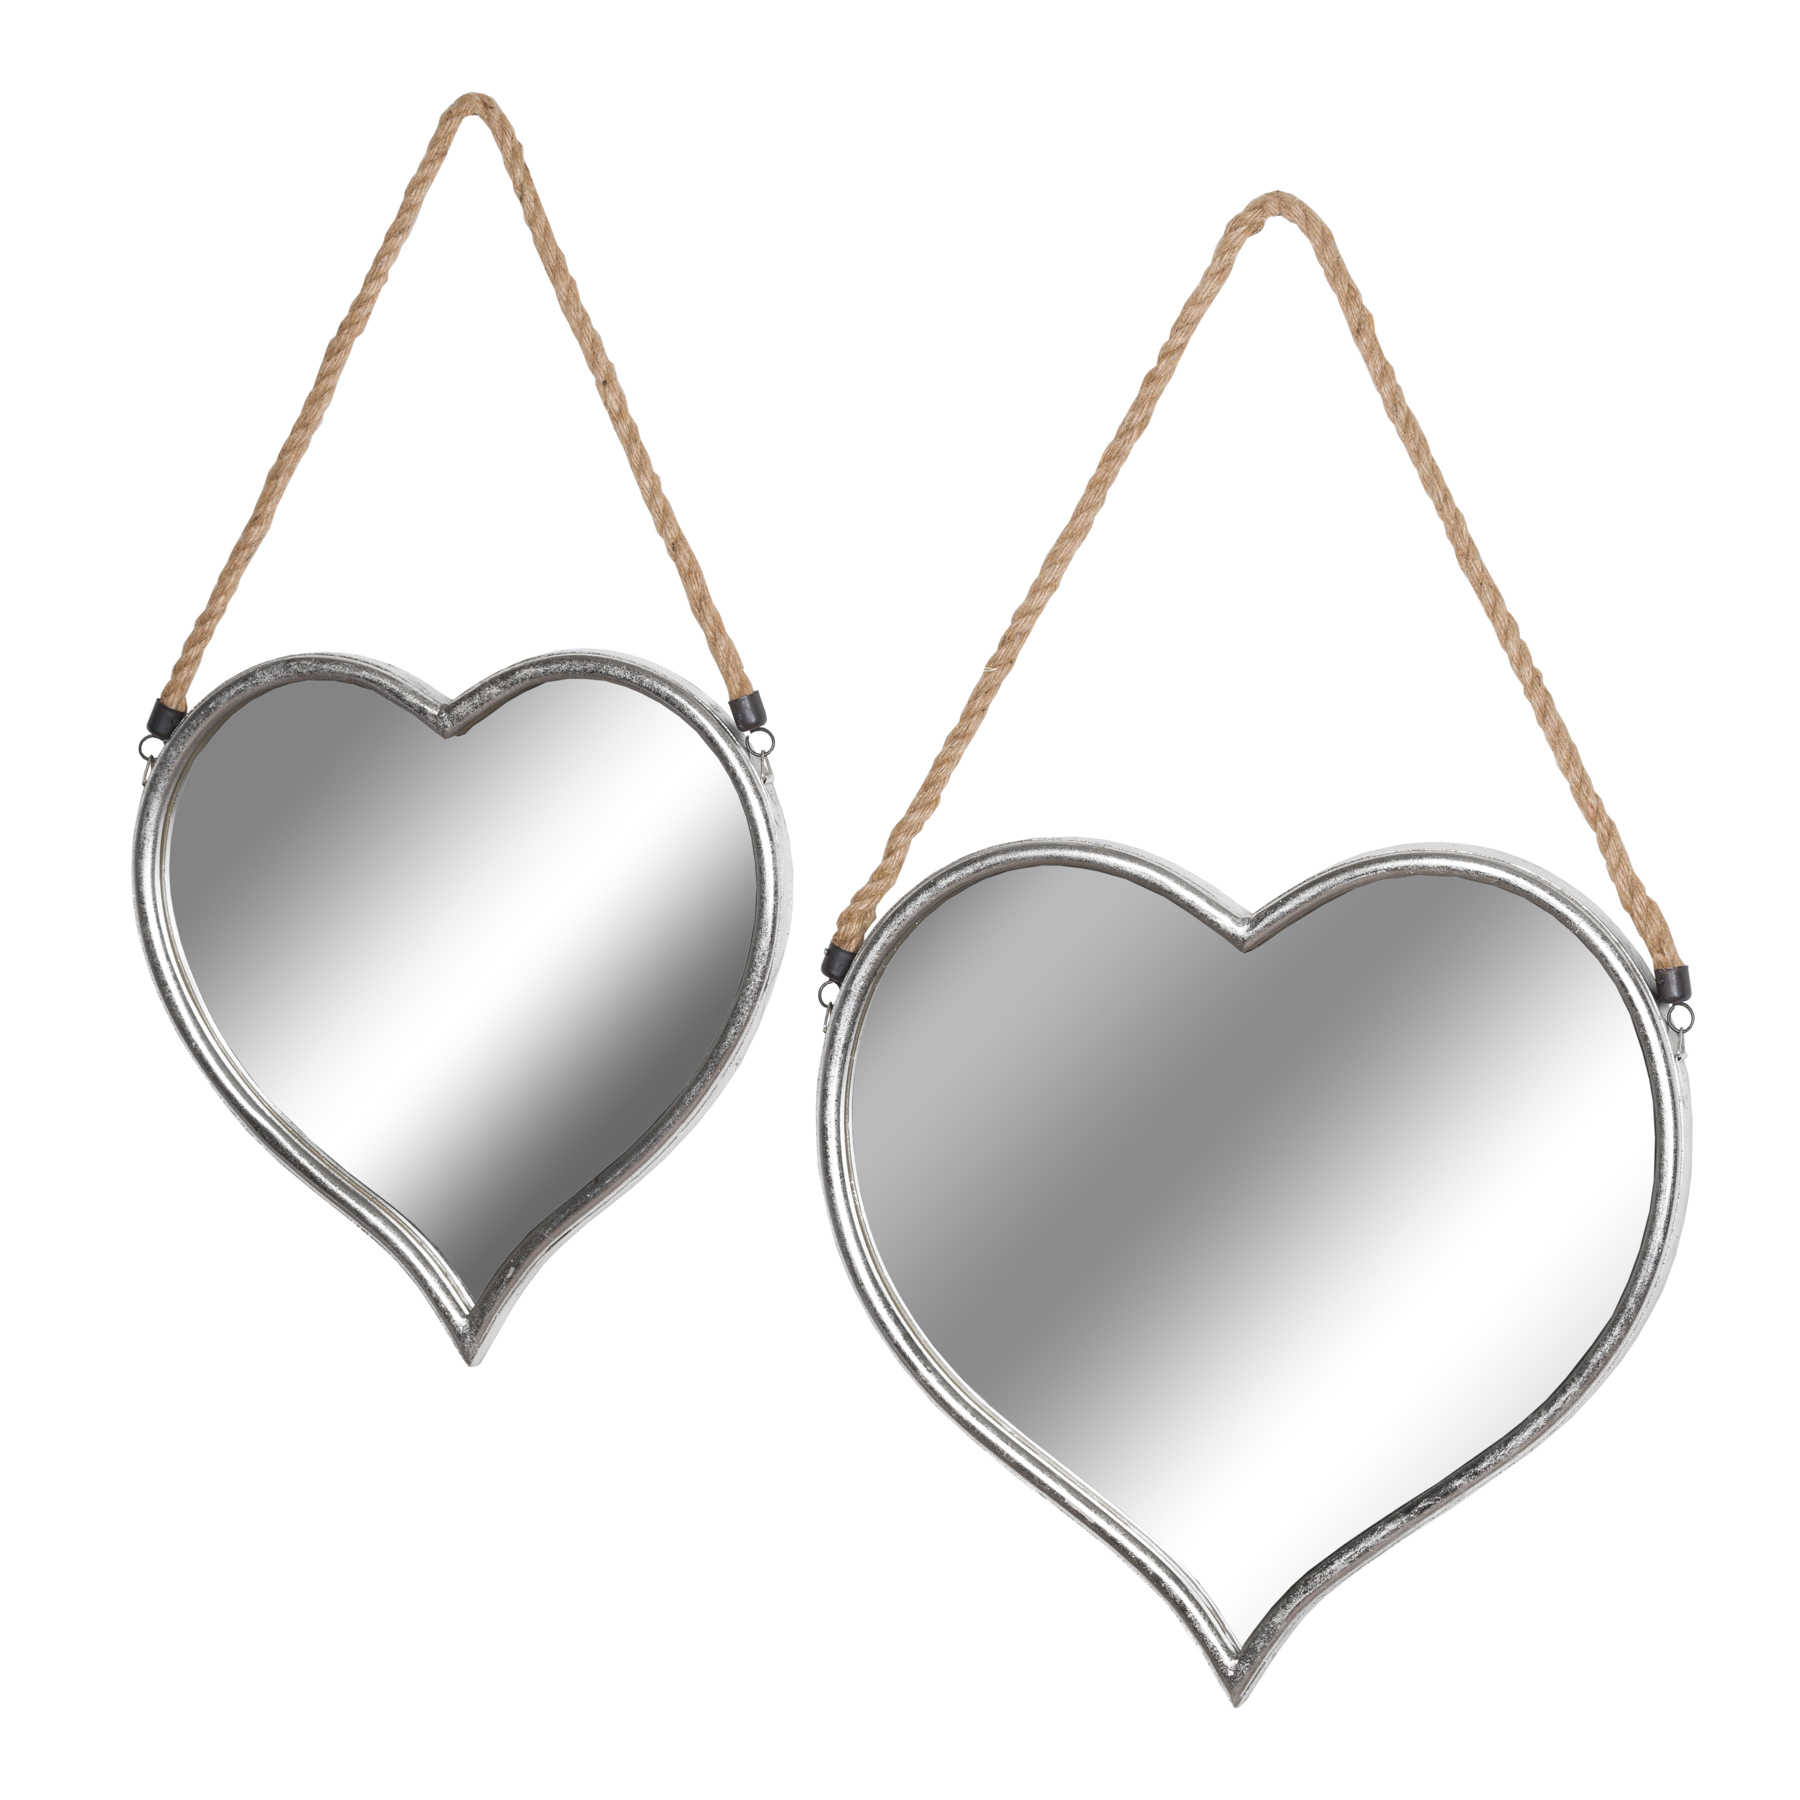 Set Of Two Heart Mirrors With Rope Detail - Image 1